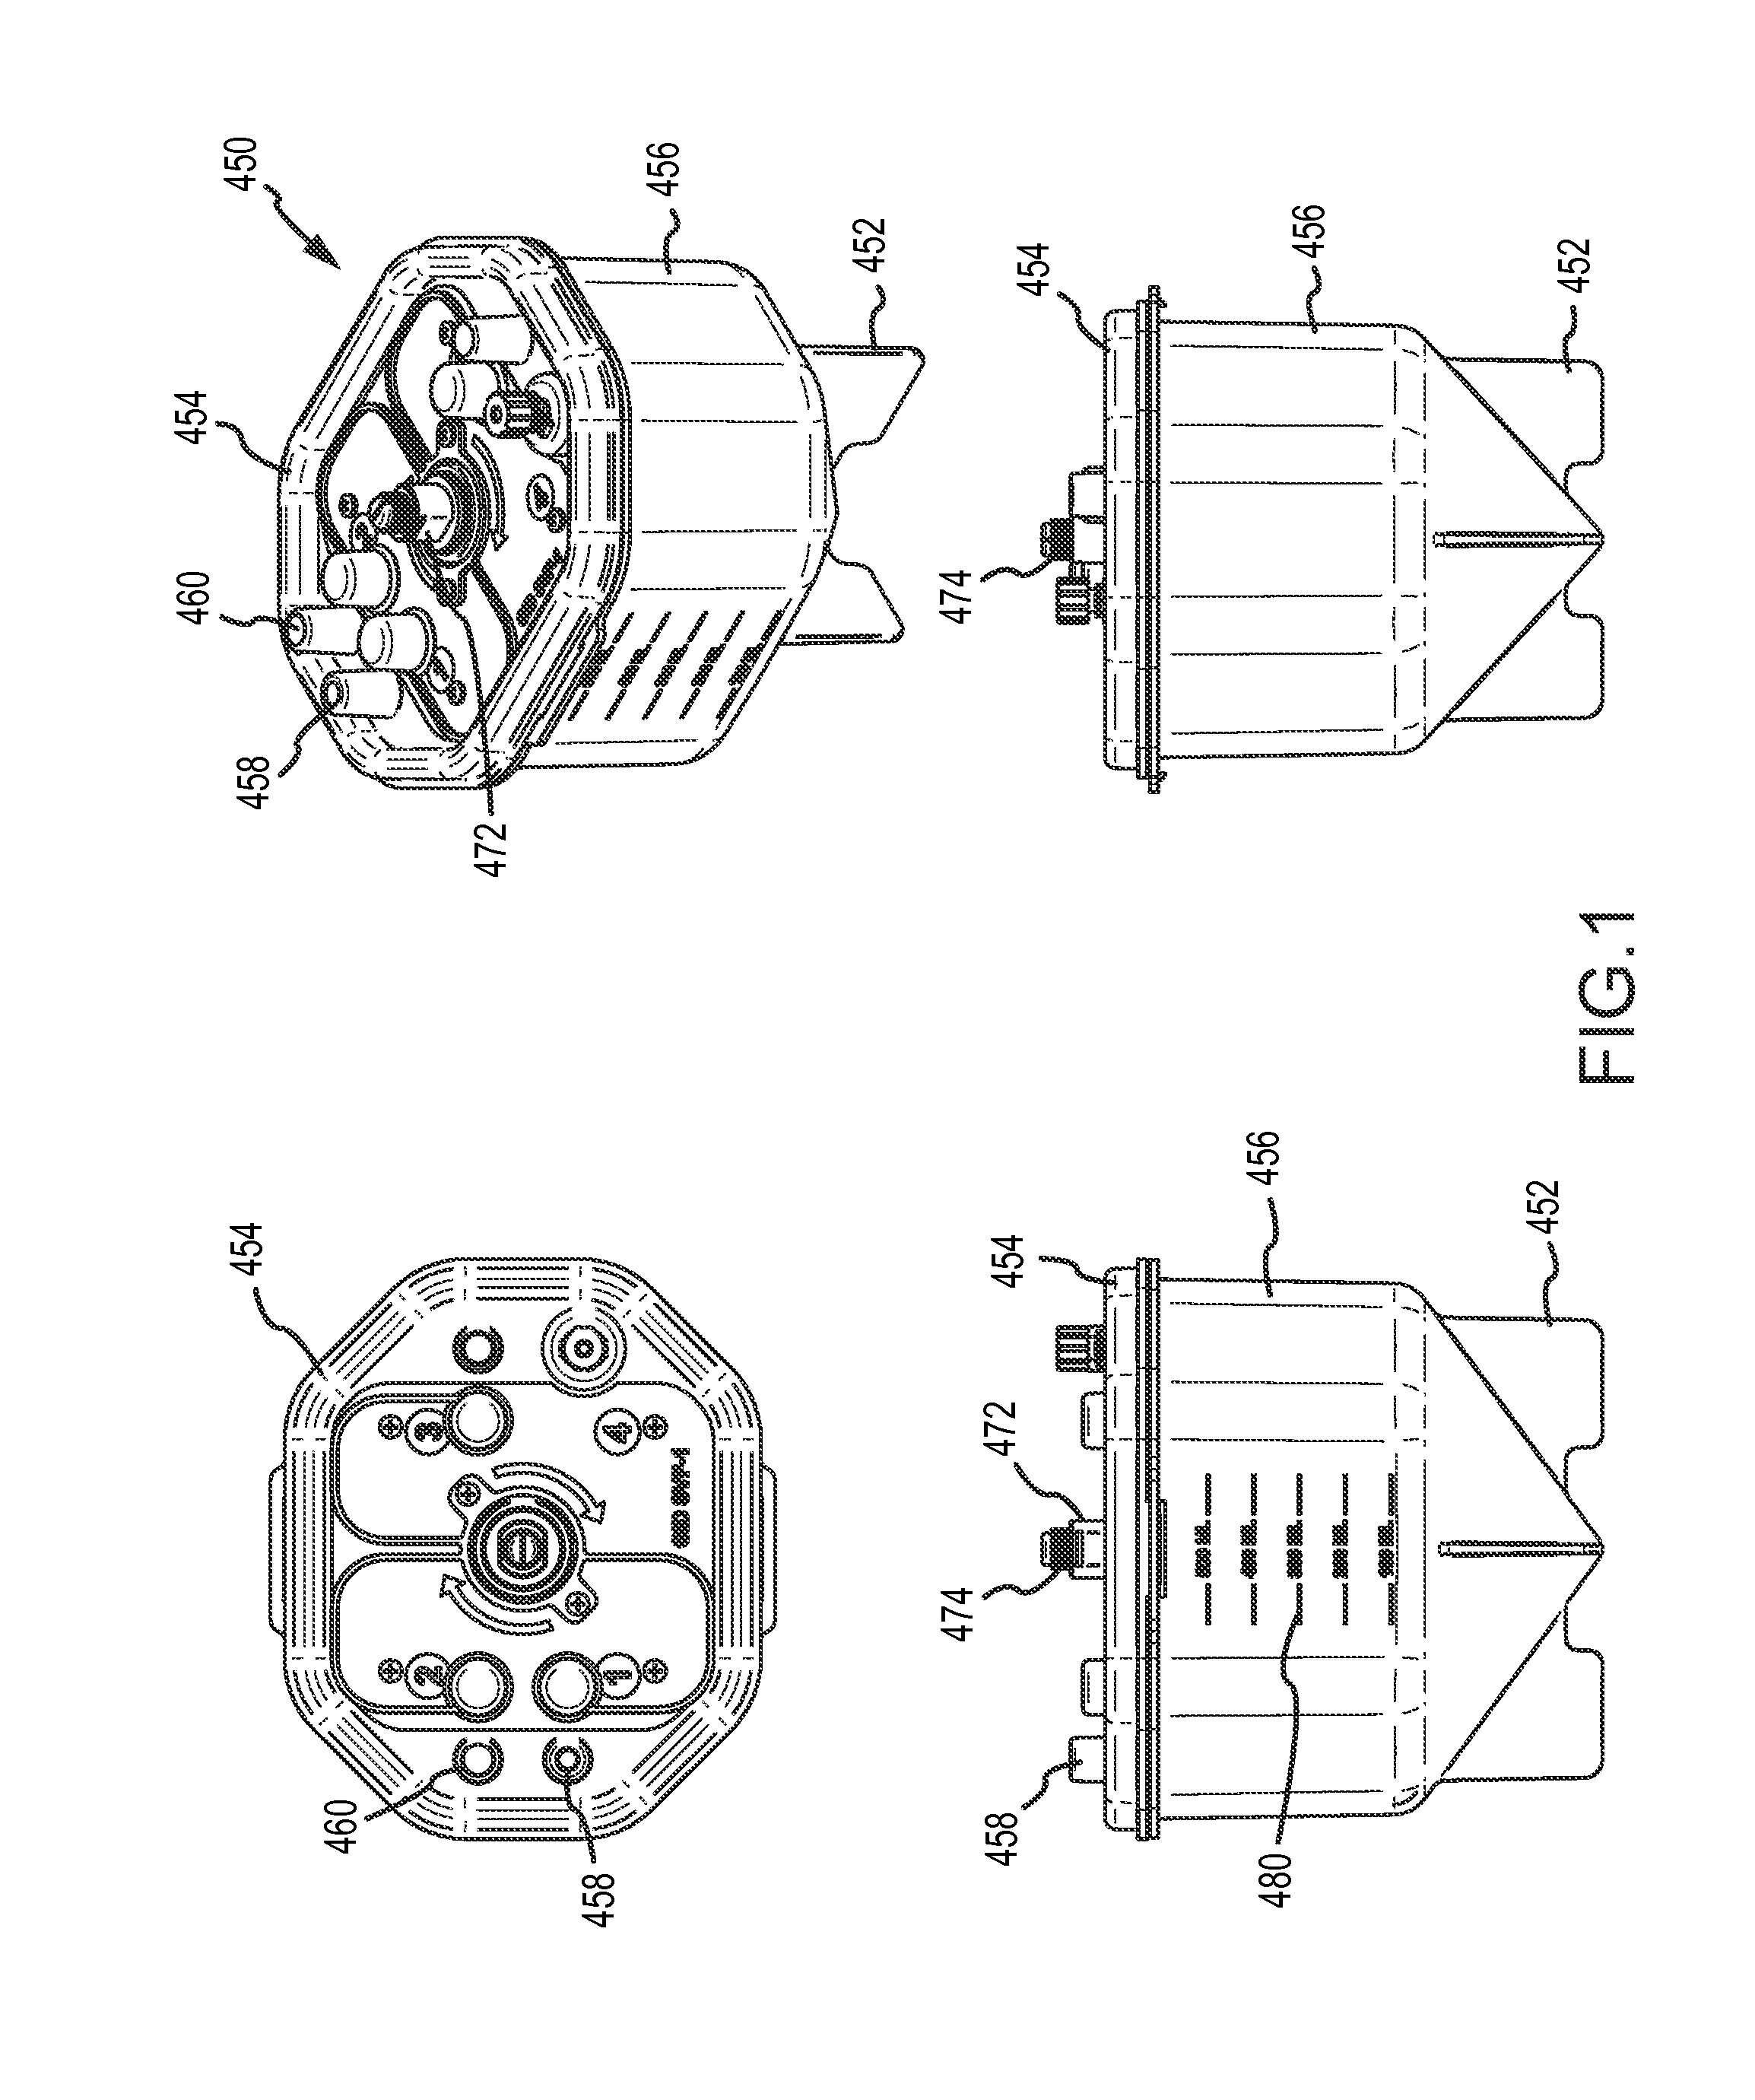 Tissue processing apparatus and method for processing adipose tissue